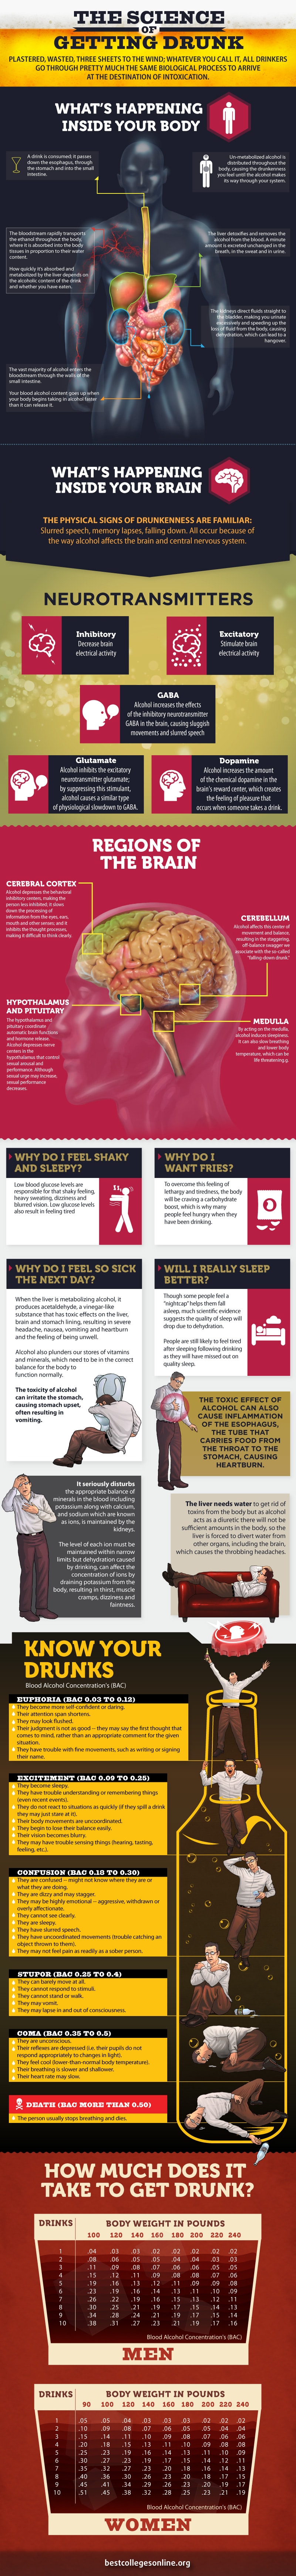 The Science Of Getting Drunk [Infographic]